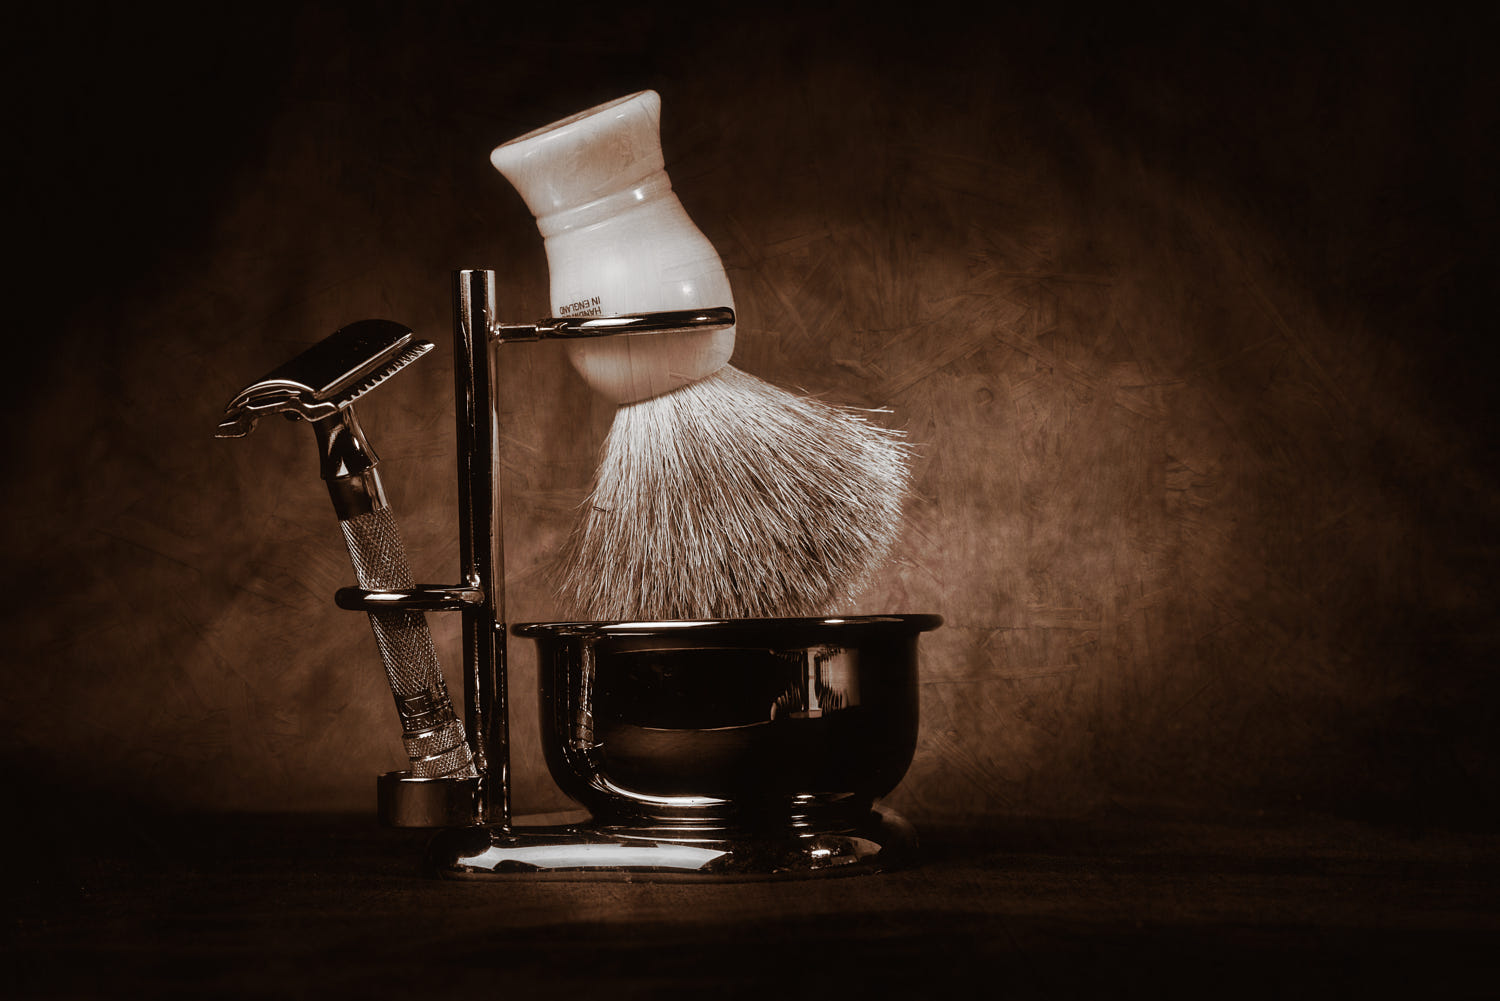 9 vintage photography close shave by peter gancarcik